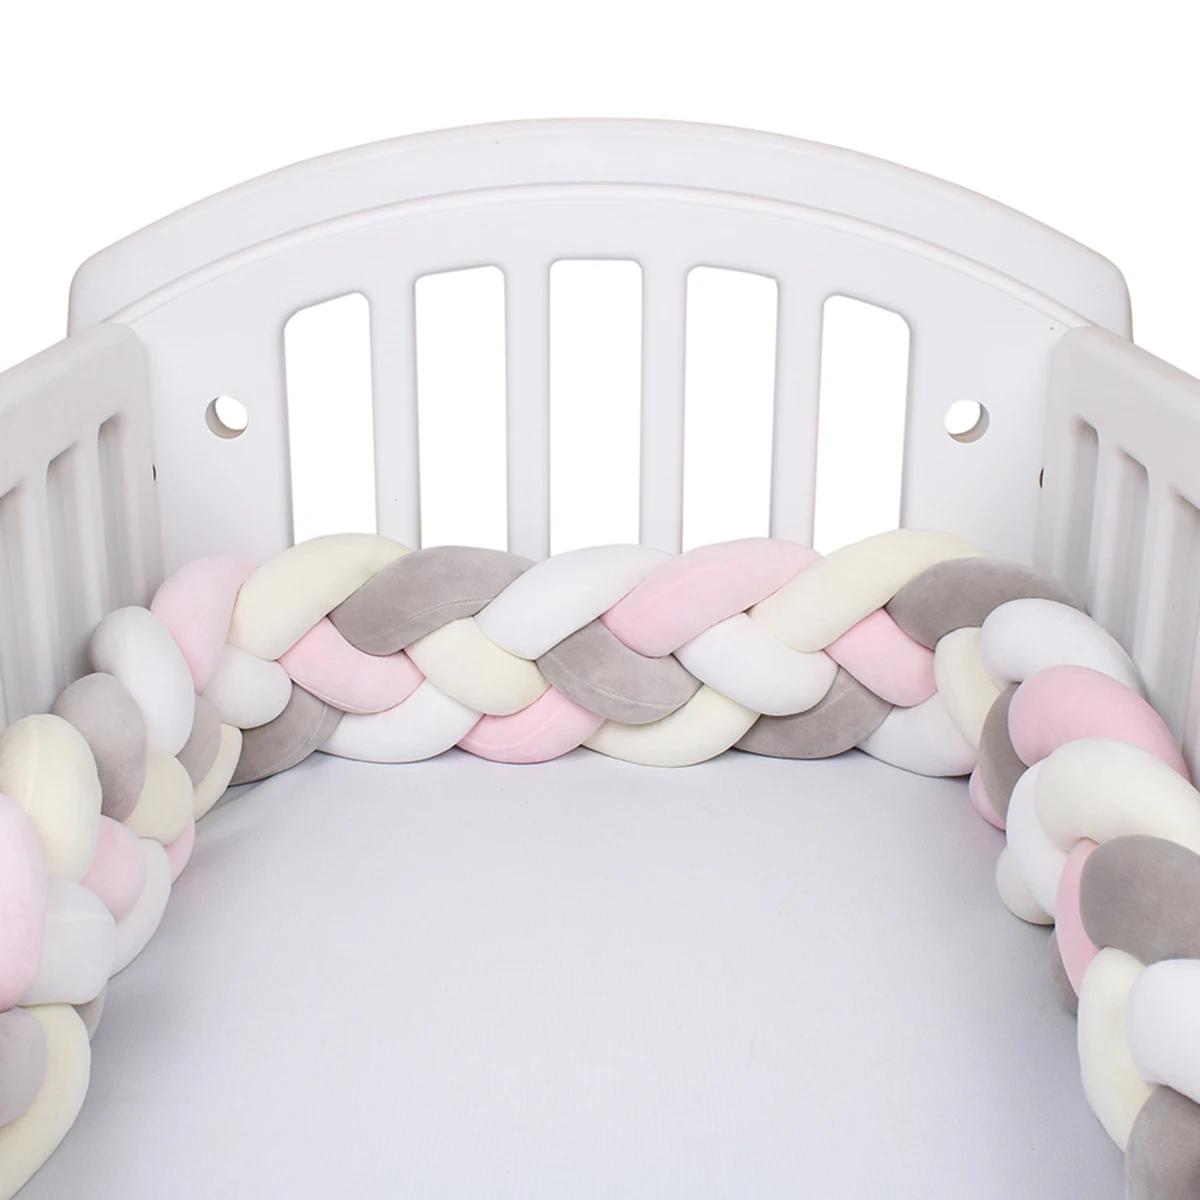 Widen Braided Crib Bumper Boy Girl Bumpers For Baby Bed Organizer Cot Protector Newborn Bed Accessories Room Decor Gift images - 6